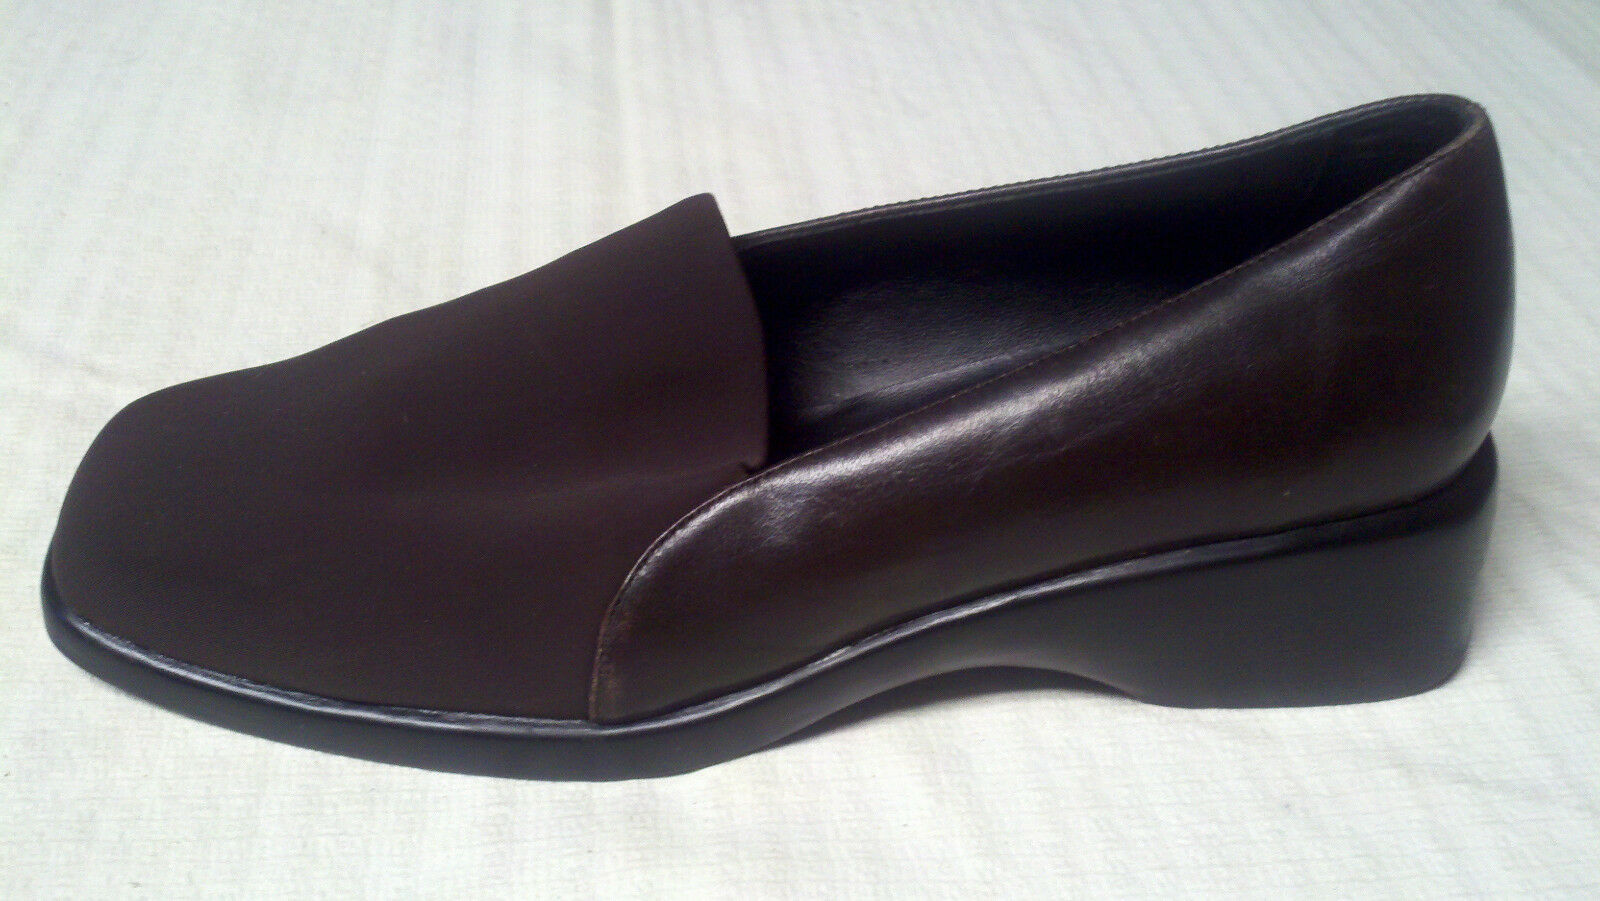 AeroSoles "Stretched Truth" Low Heel Loafer Womens Shoes Brown Leather Size 8